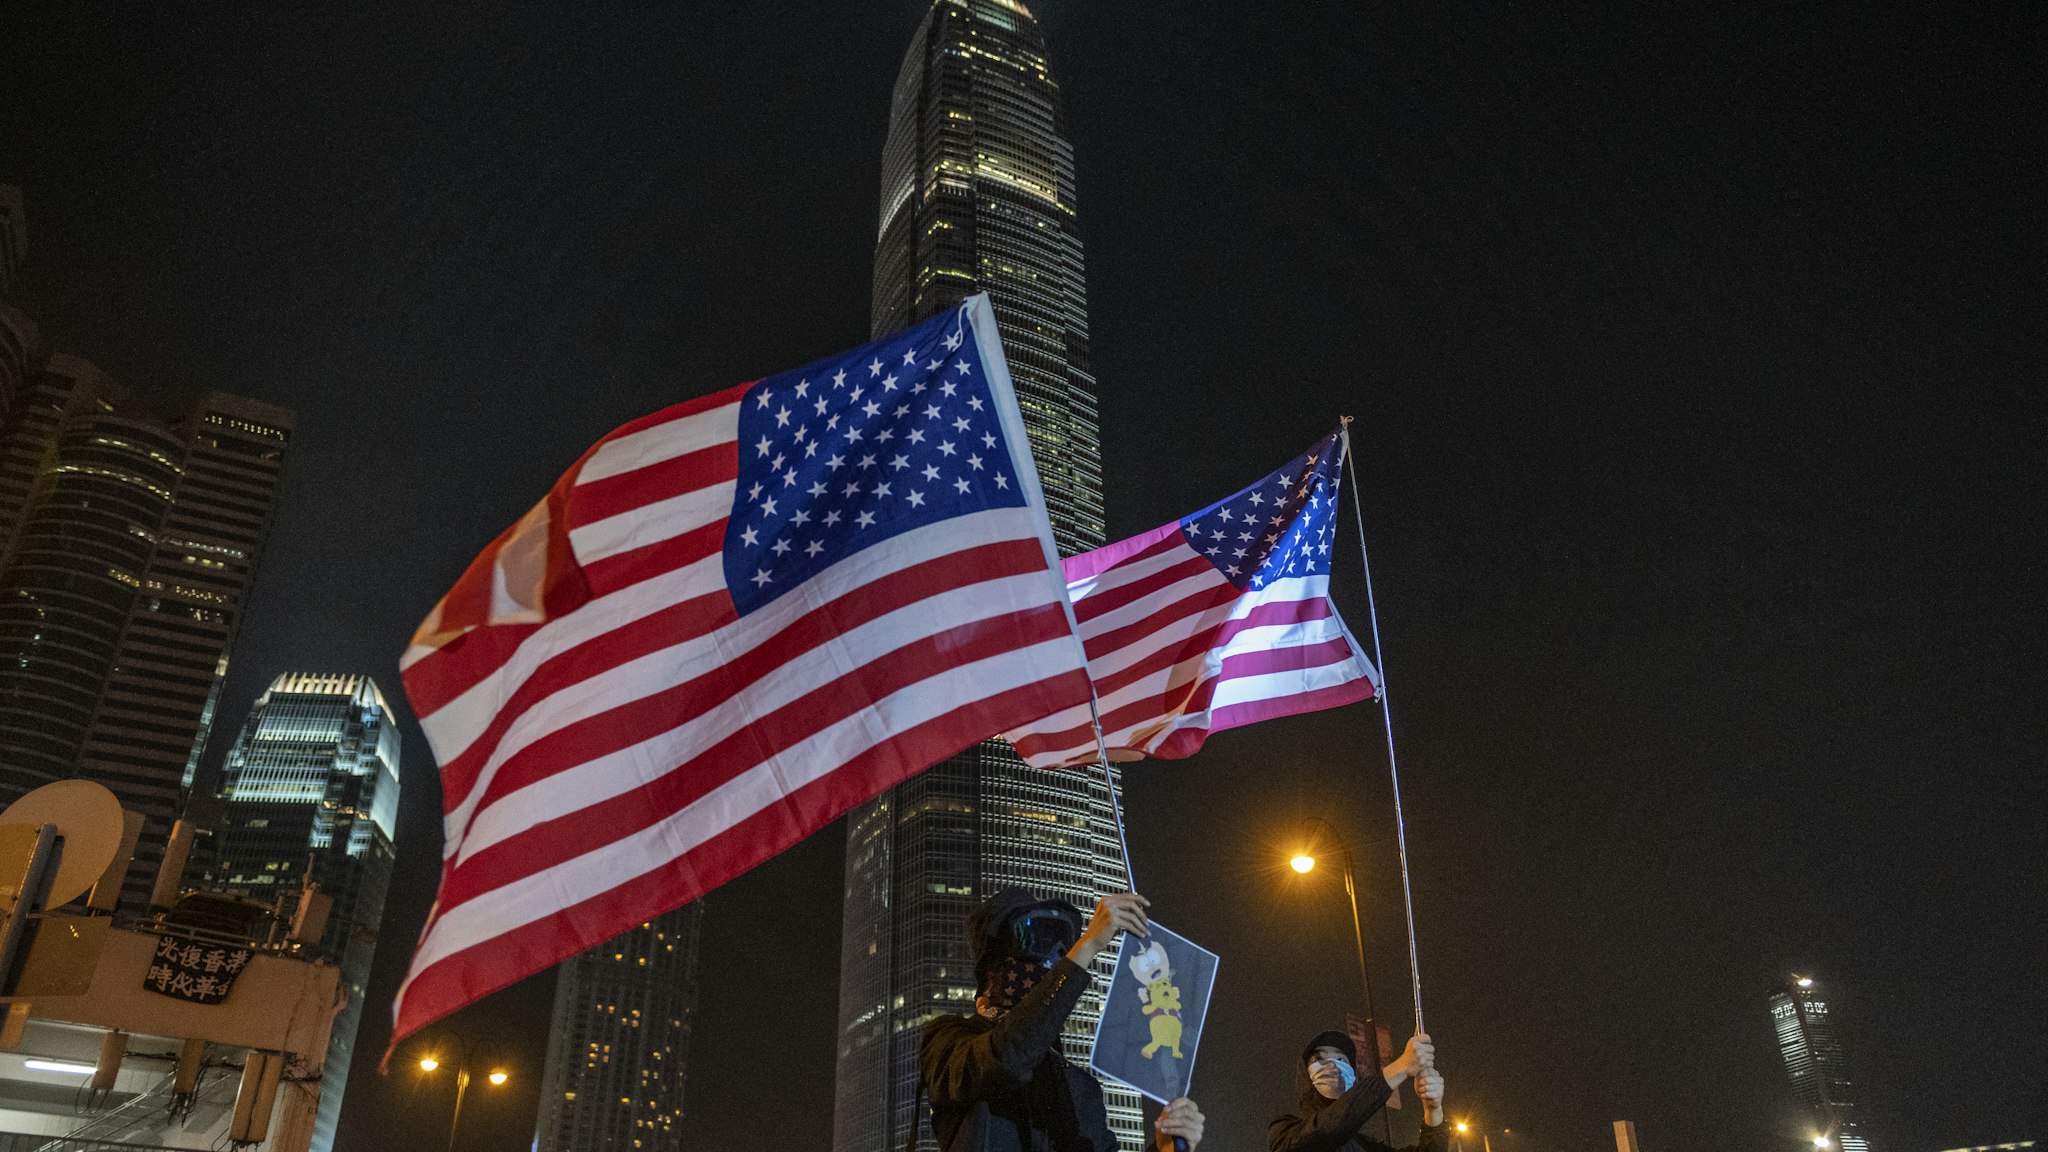 Protesters are seen waving US Flags during an anti-government Protest in Hong Kong, China, October 19, 2019. Pro-democracy Protesters have been taking to the streets in Hong Kong for months of the Government. (Photo by Vernon Yuen/NurPhoto via Getty Images)